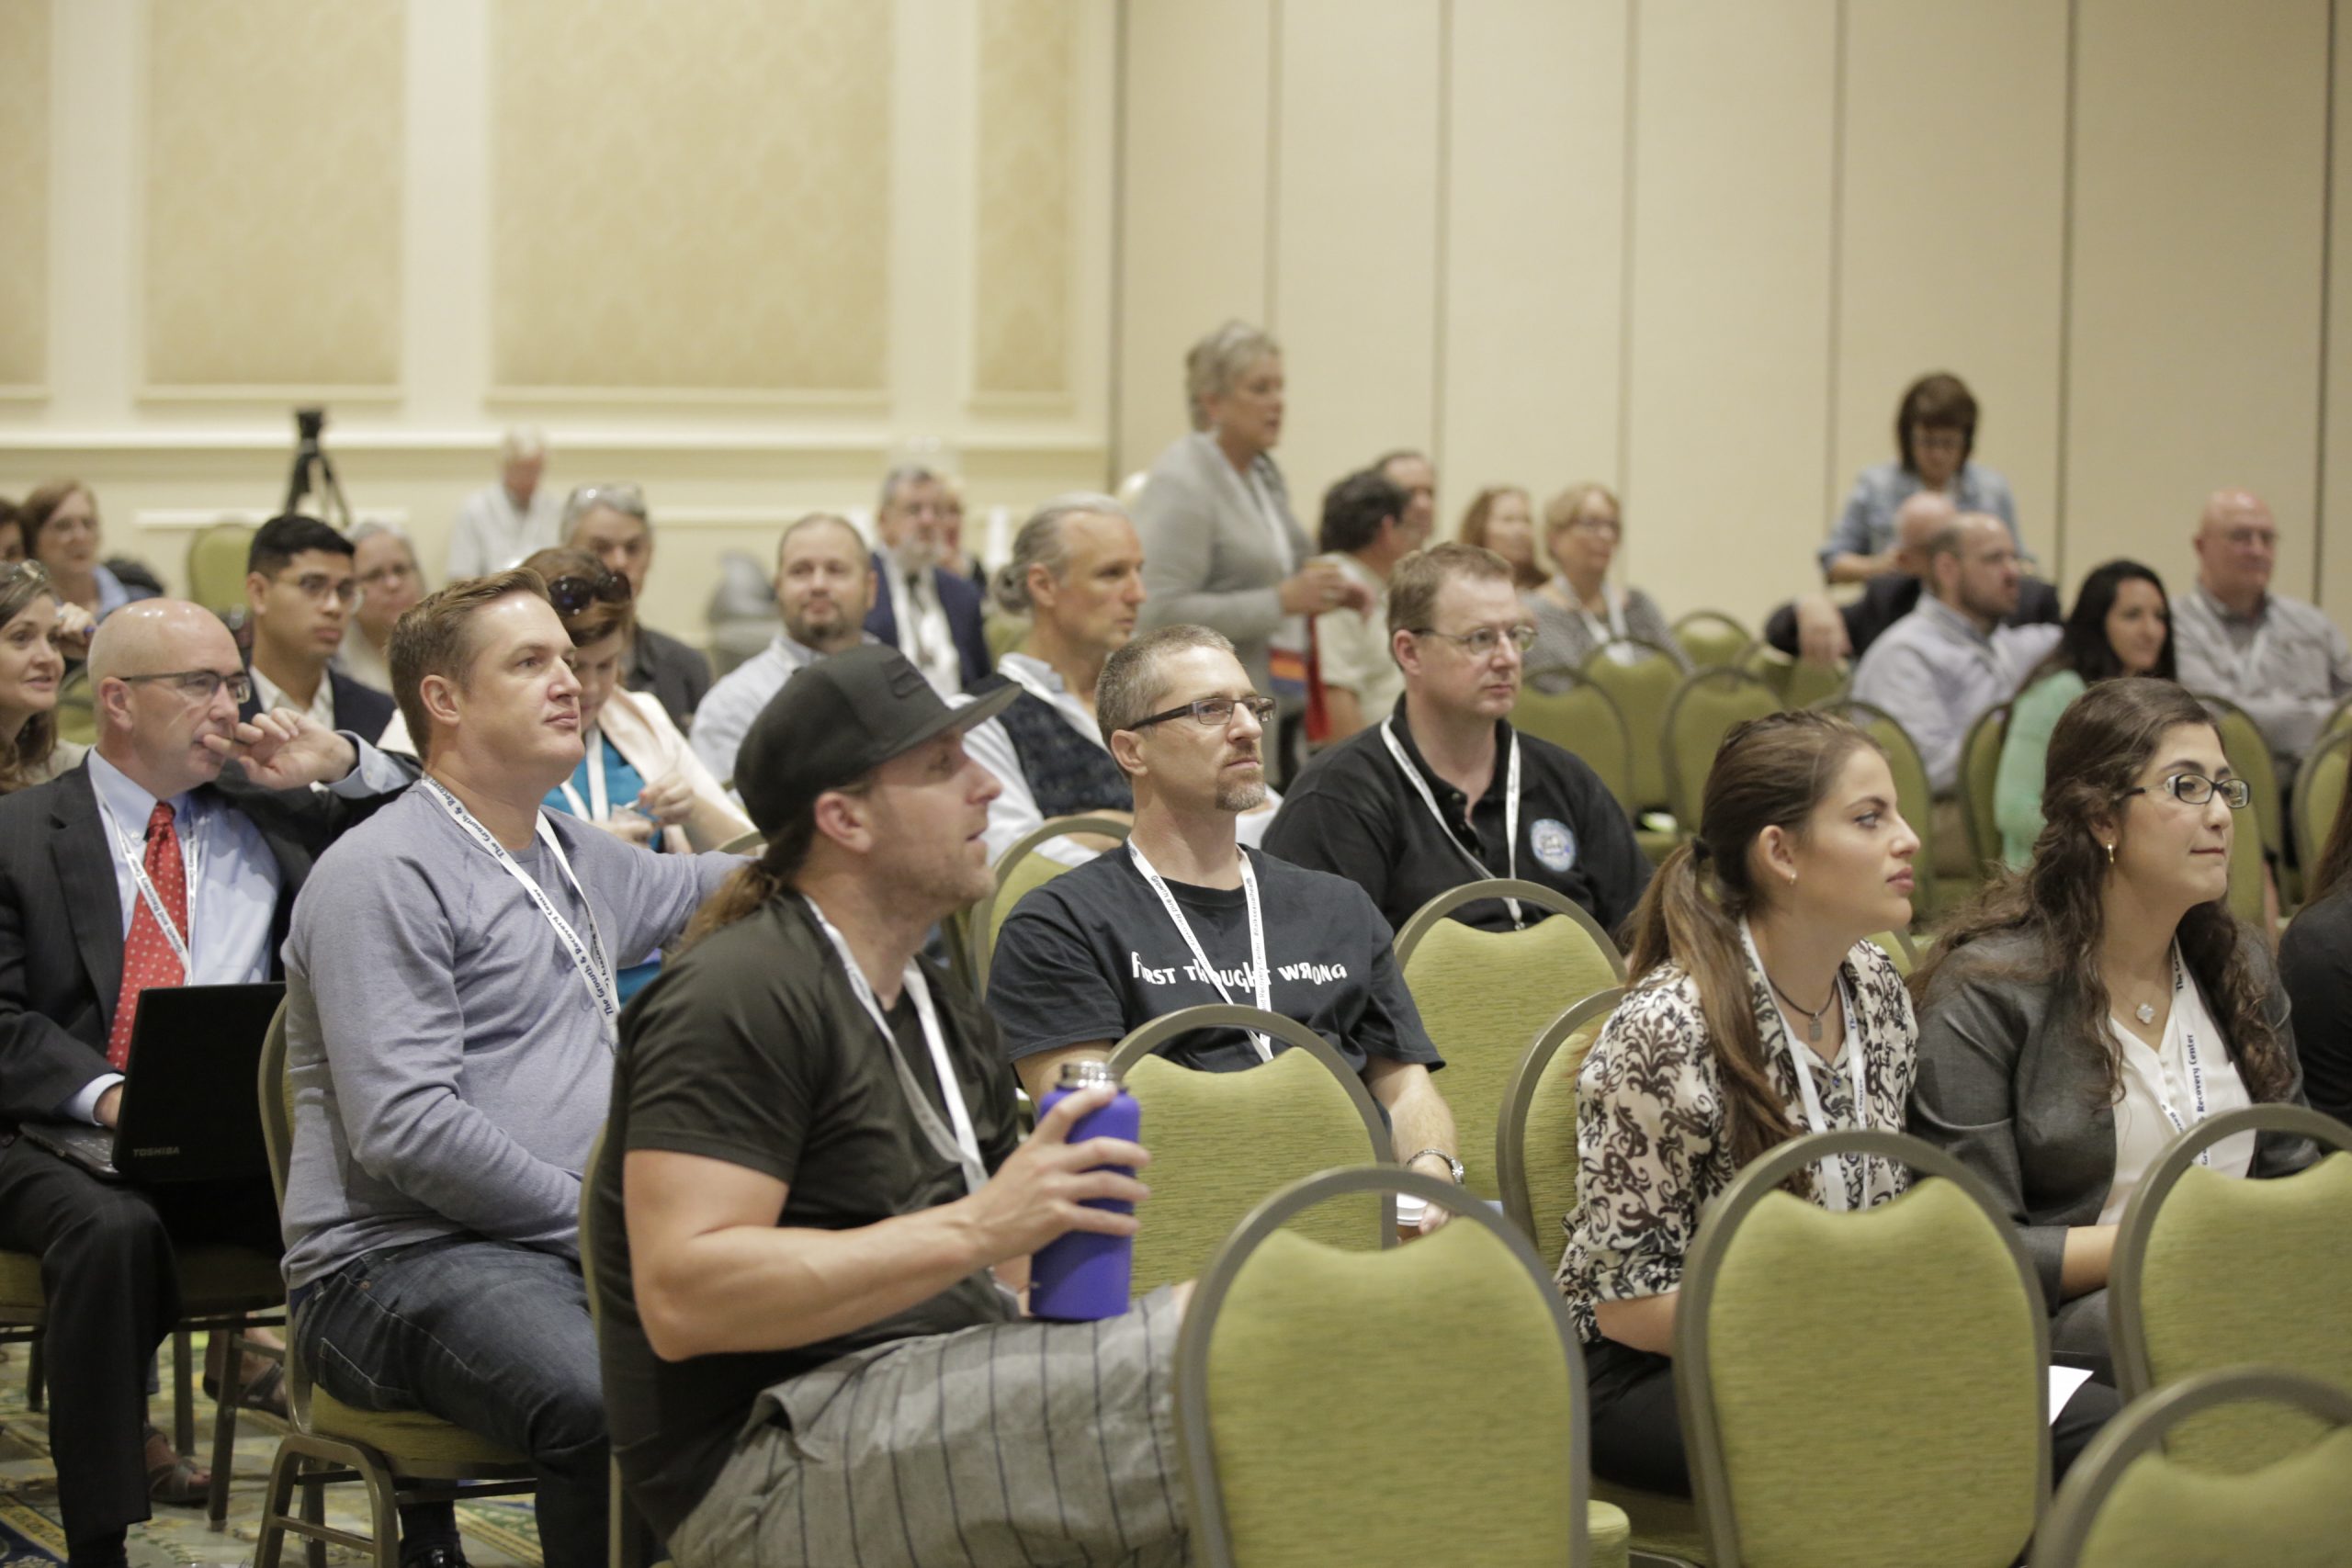 Attendees listen intently to the speaker at the SASH annual conference.